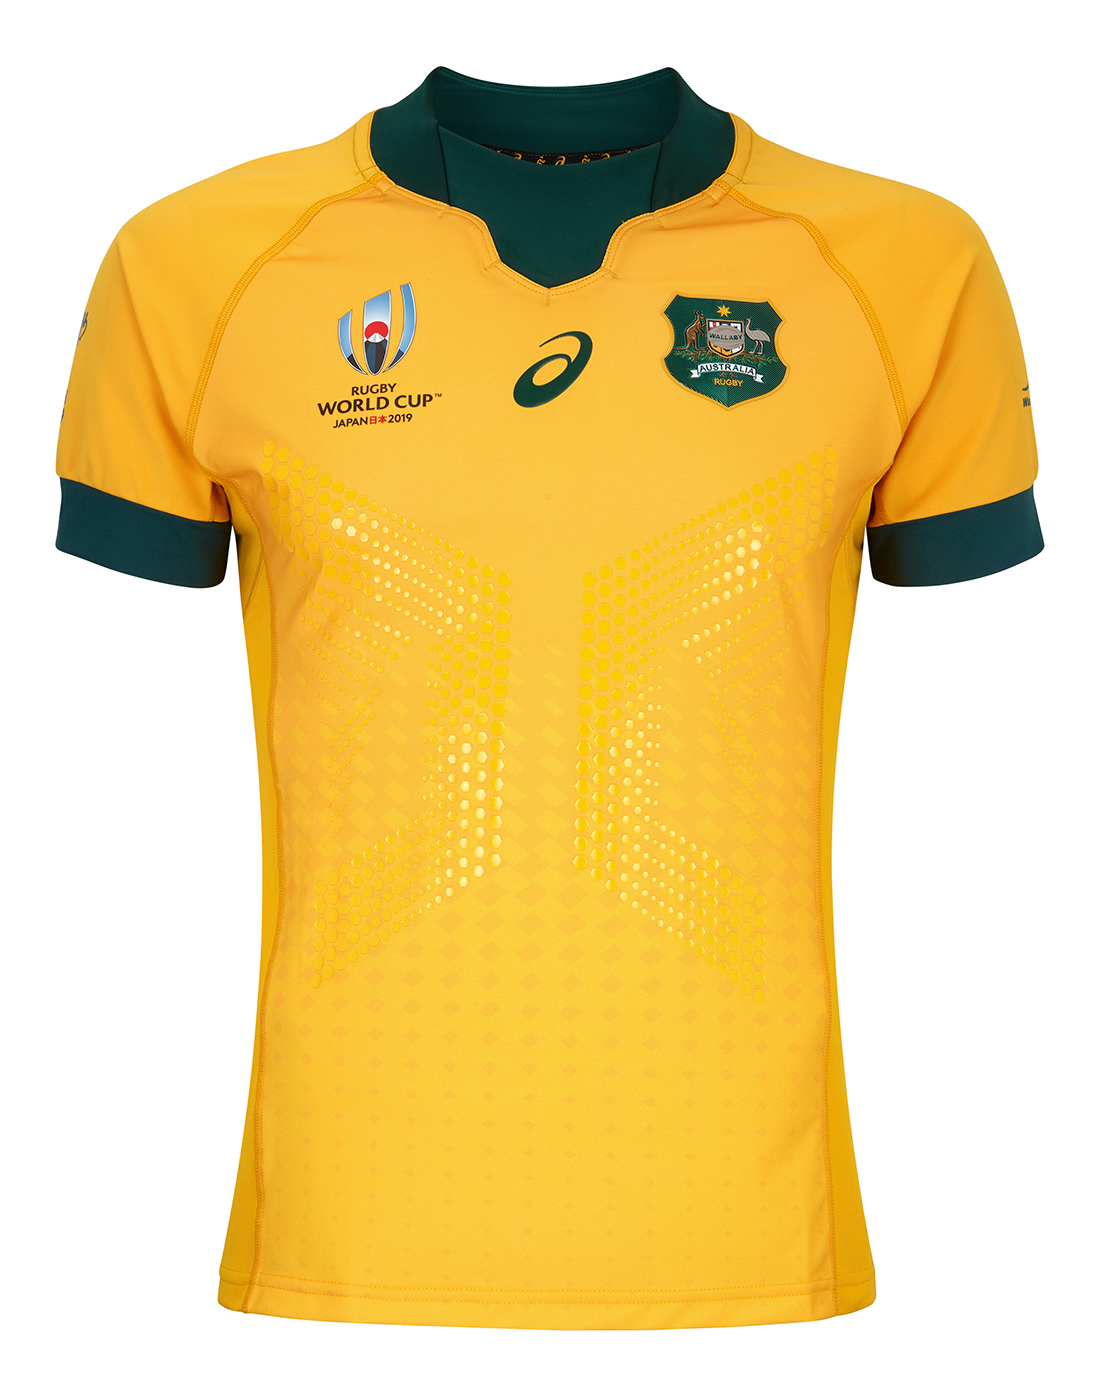 new australian rugby jersey